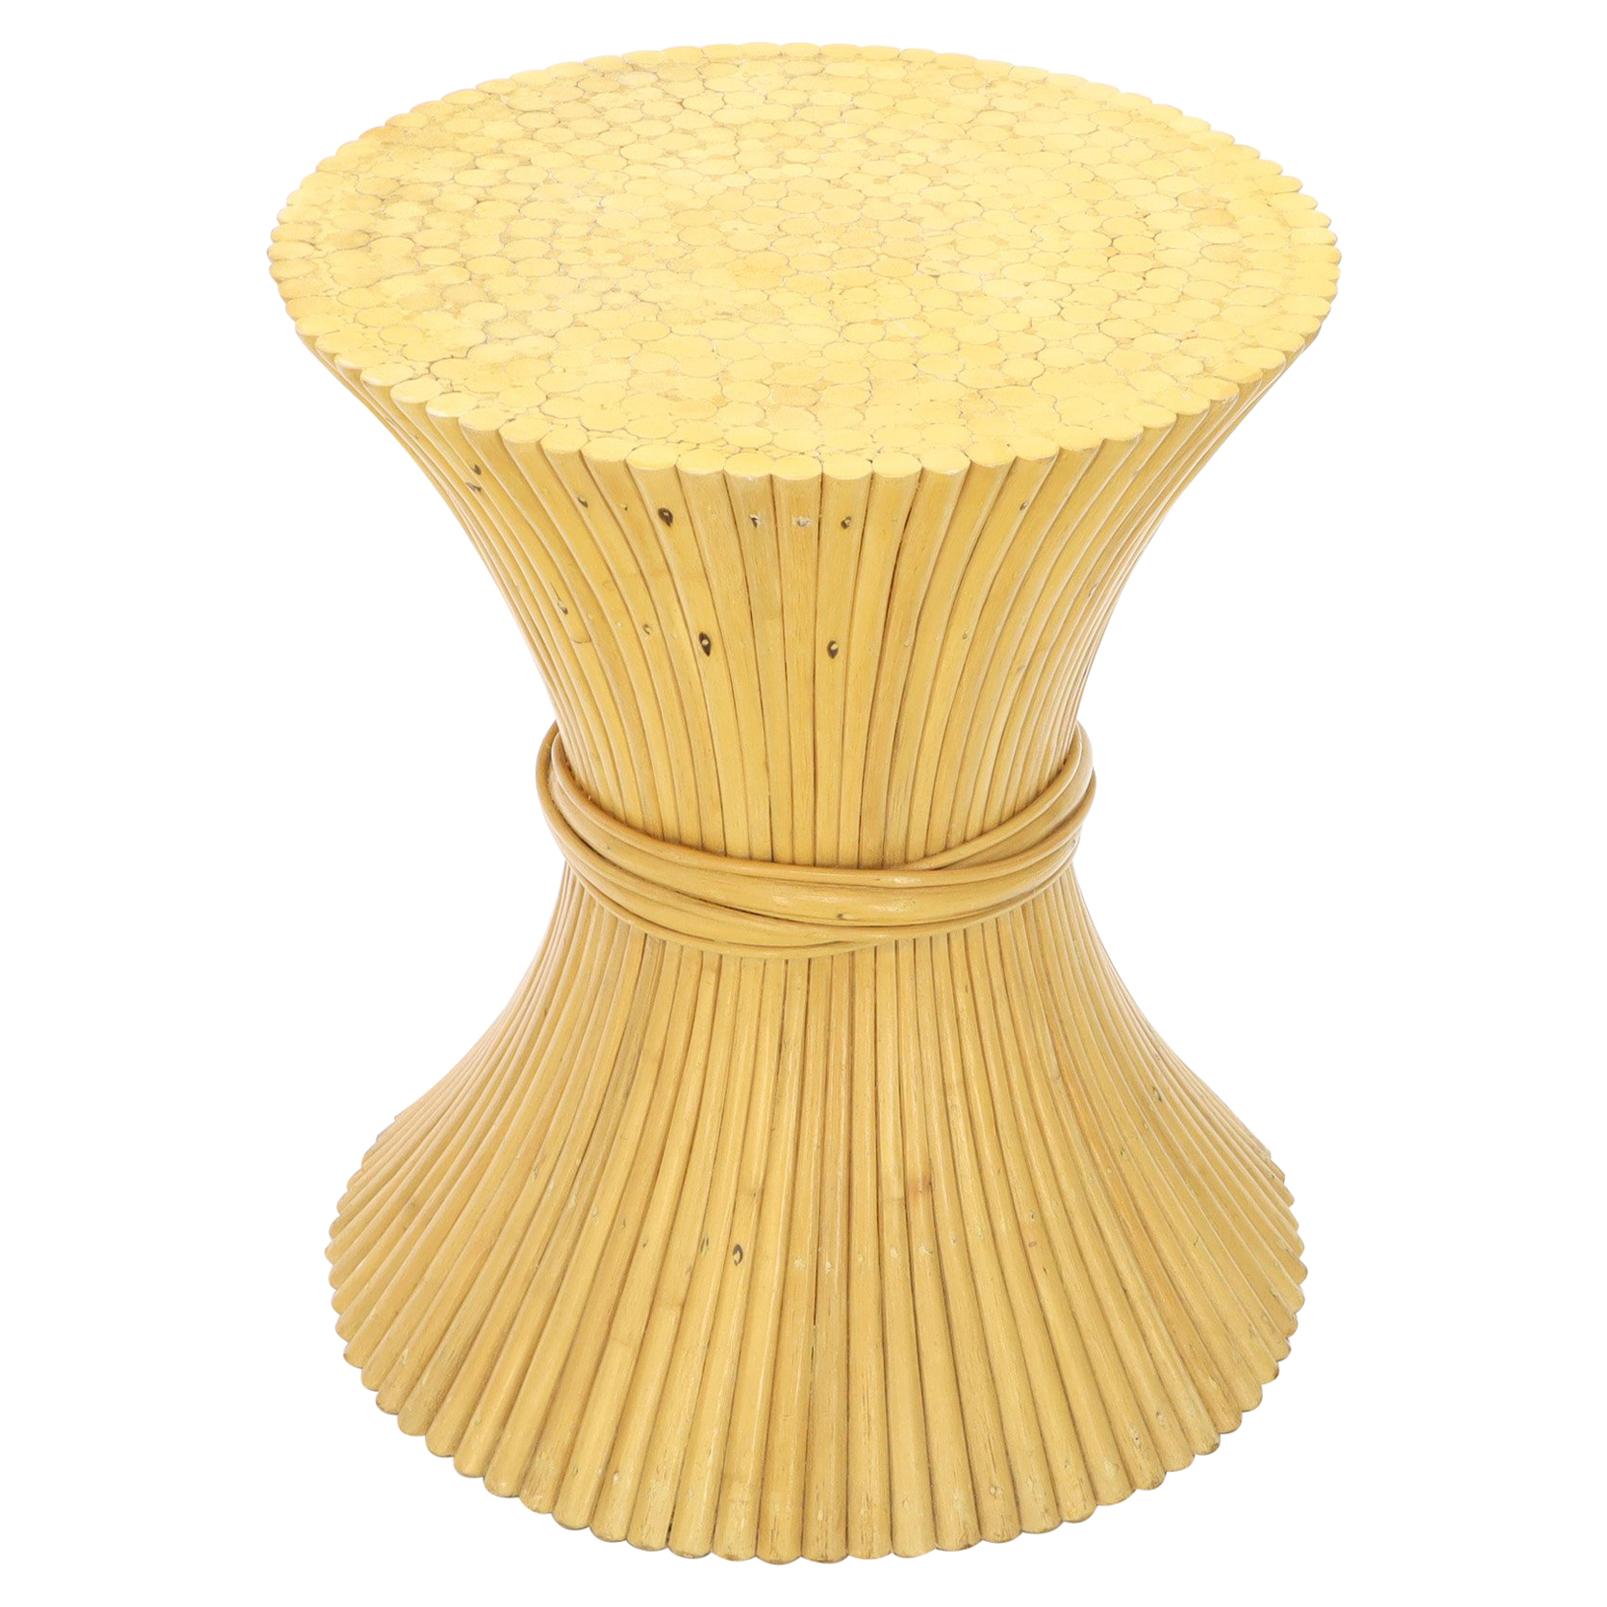 Sheaf of Bamboo Wheat Round Dining Table Base McGuire